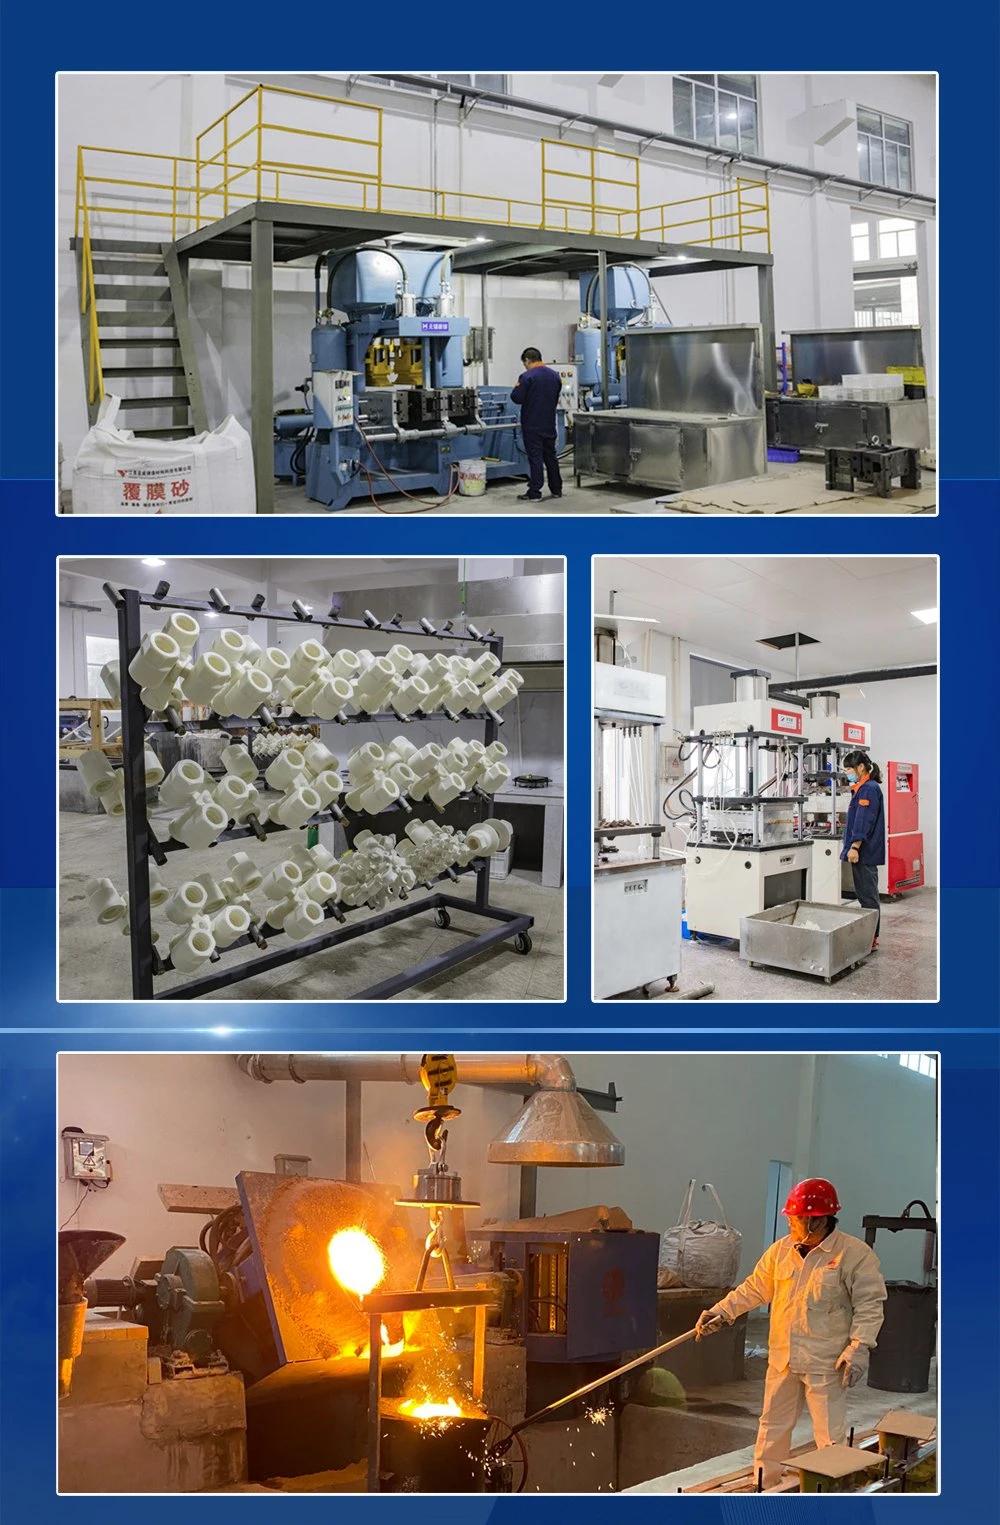 Component, Construction, Machining, Equipment, Mining, Nuts, Assembling, Power Fitting, Accessories, Tools, Bars, Hot Galvanized